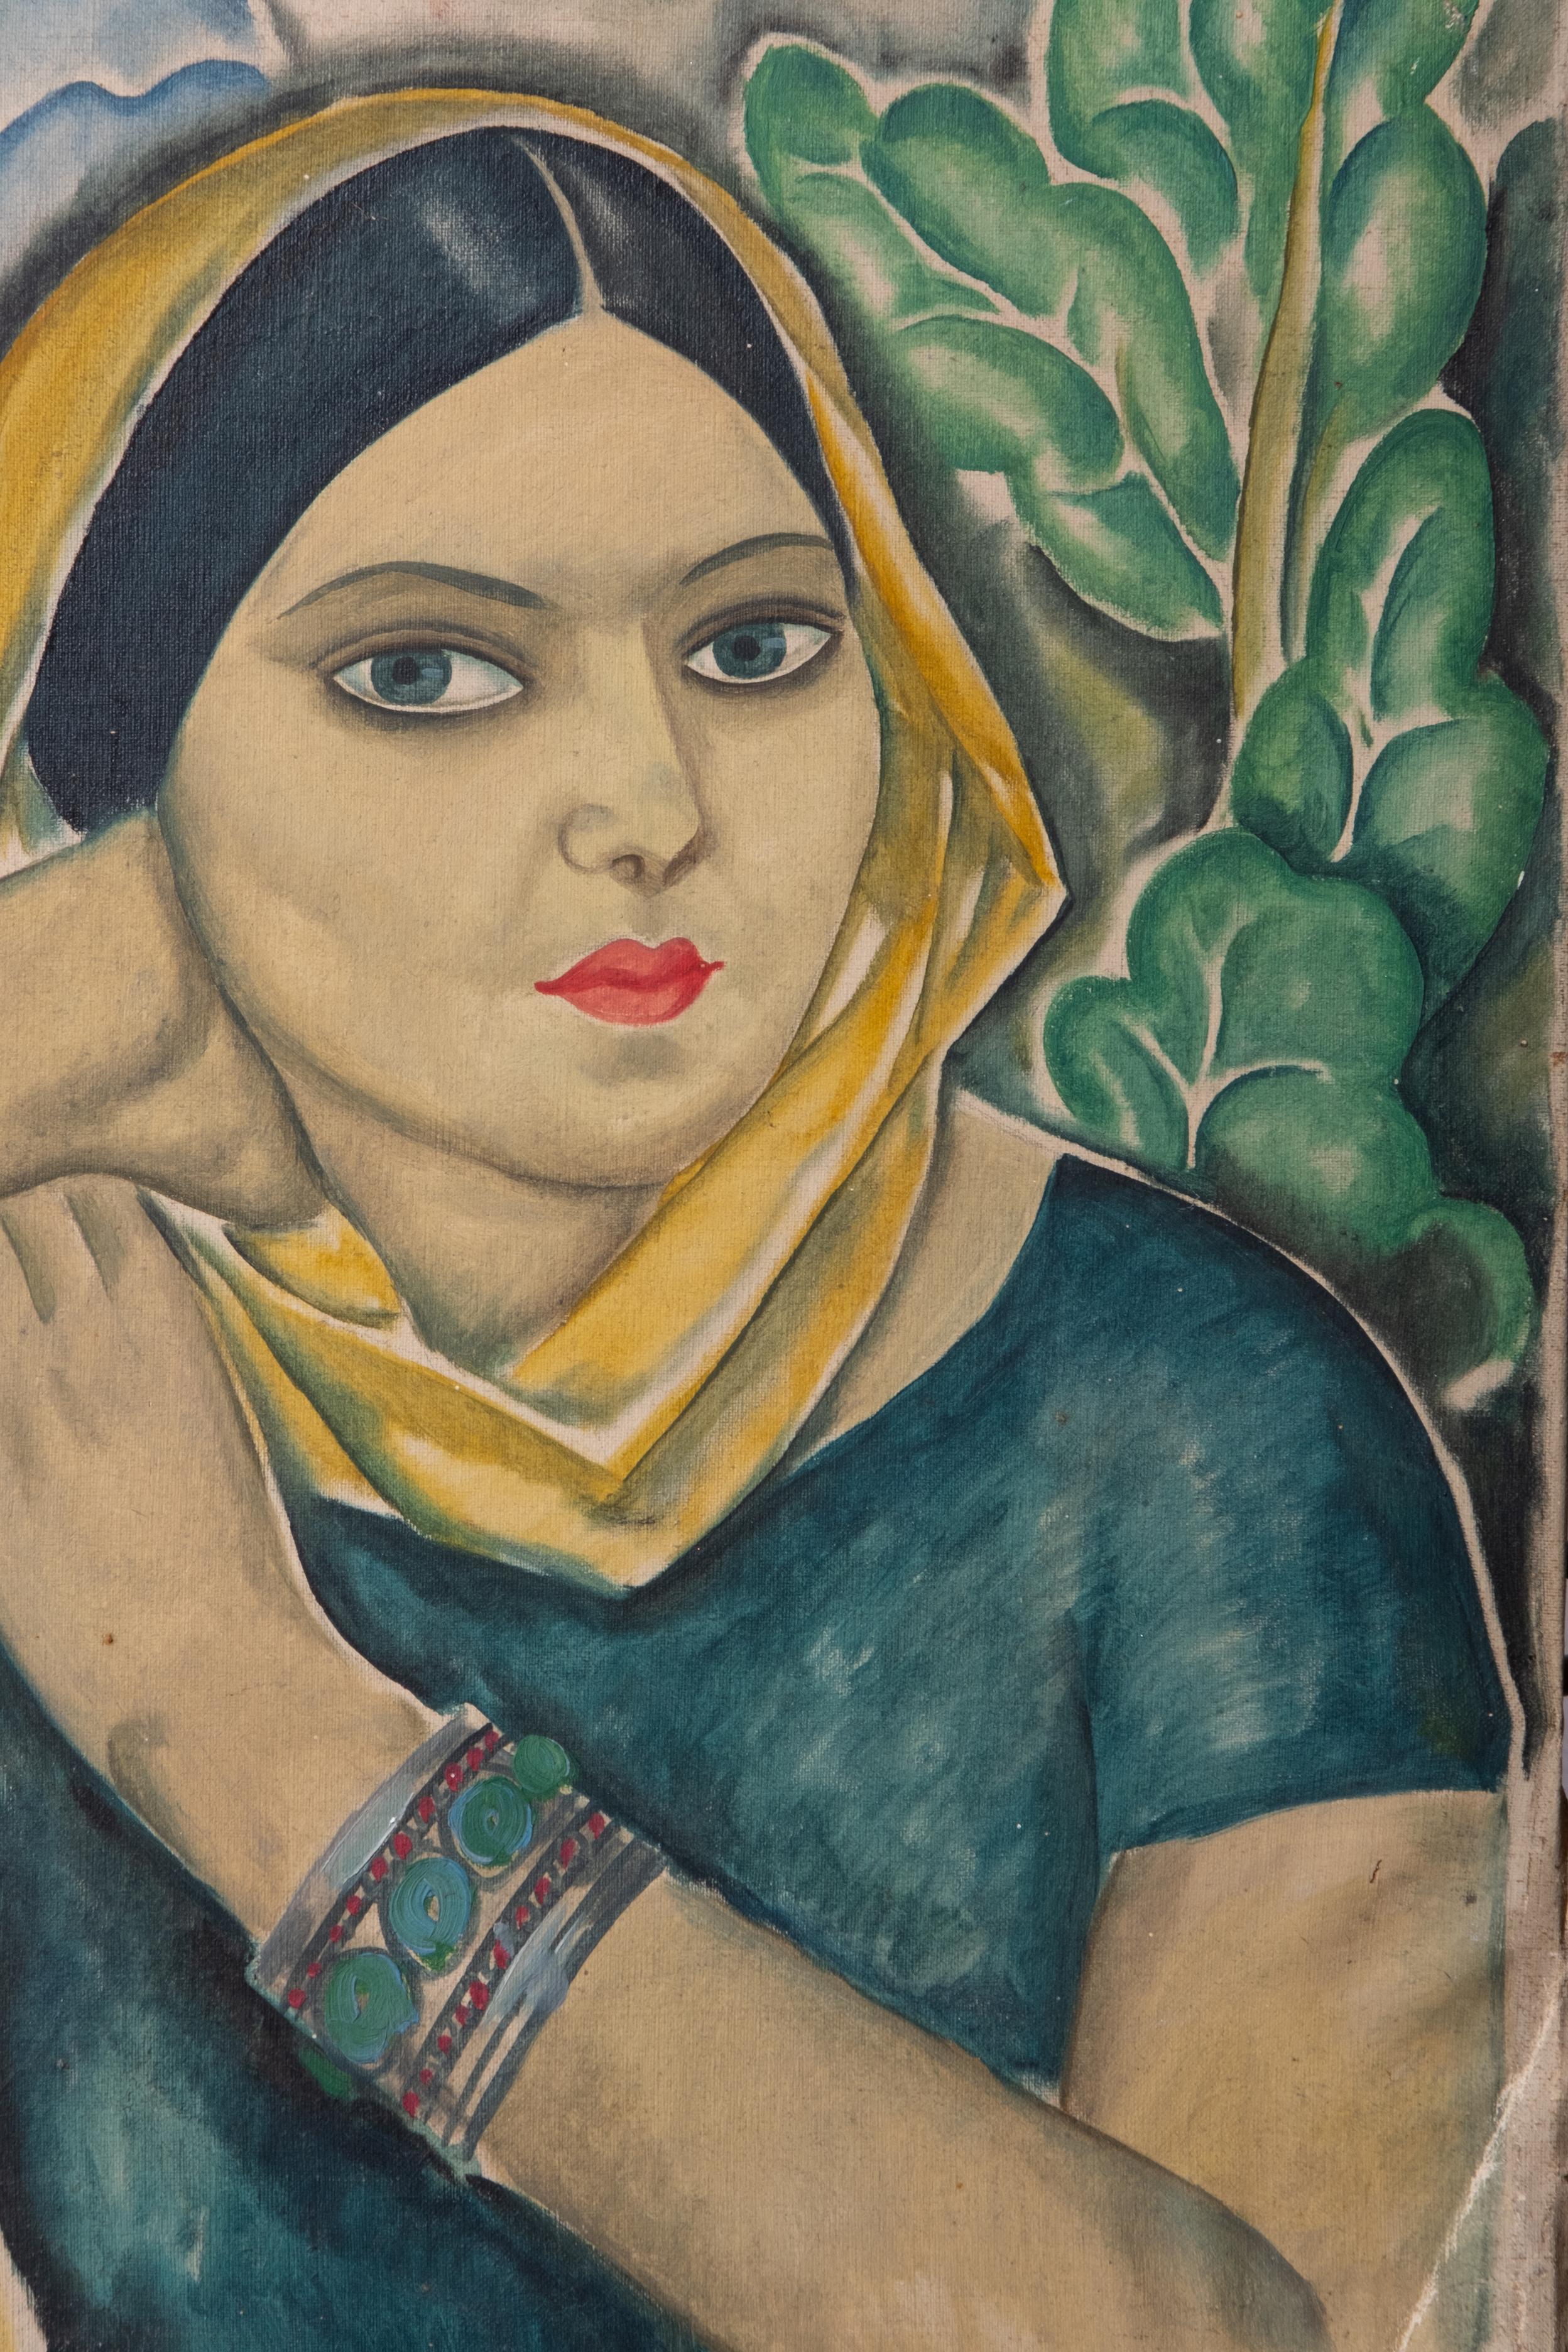 Hand-Painted Russian Avant-Garde Oil painting, early 20th century possibly Natalya Goncharova